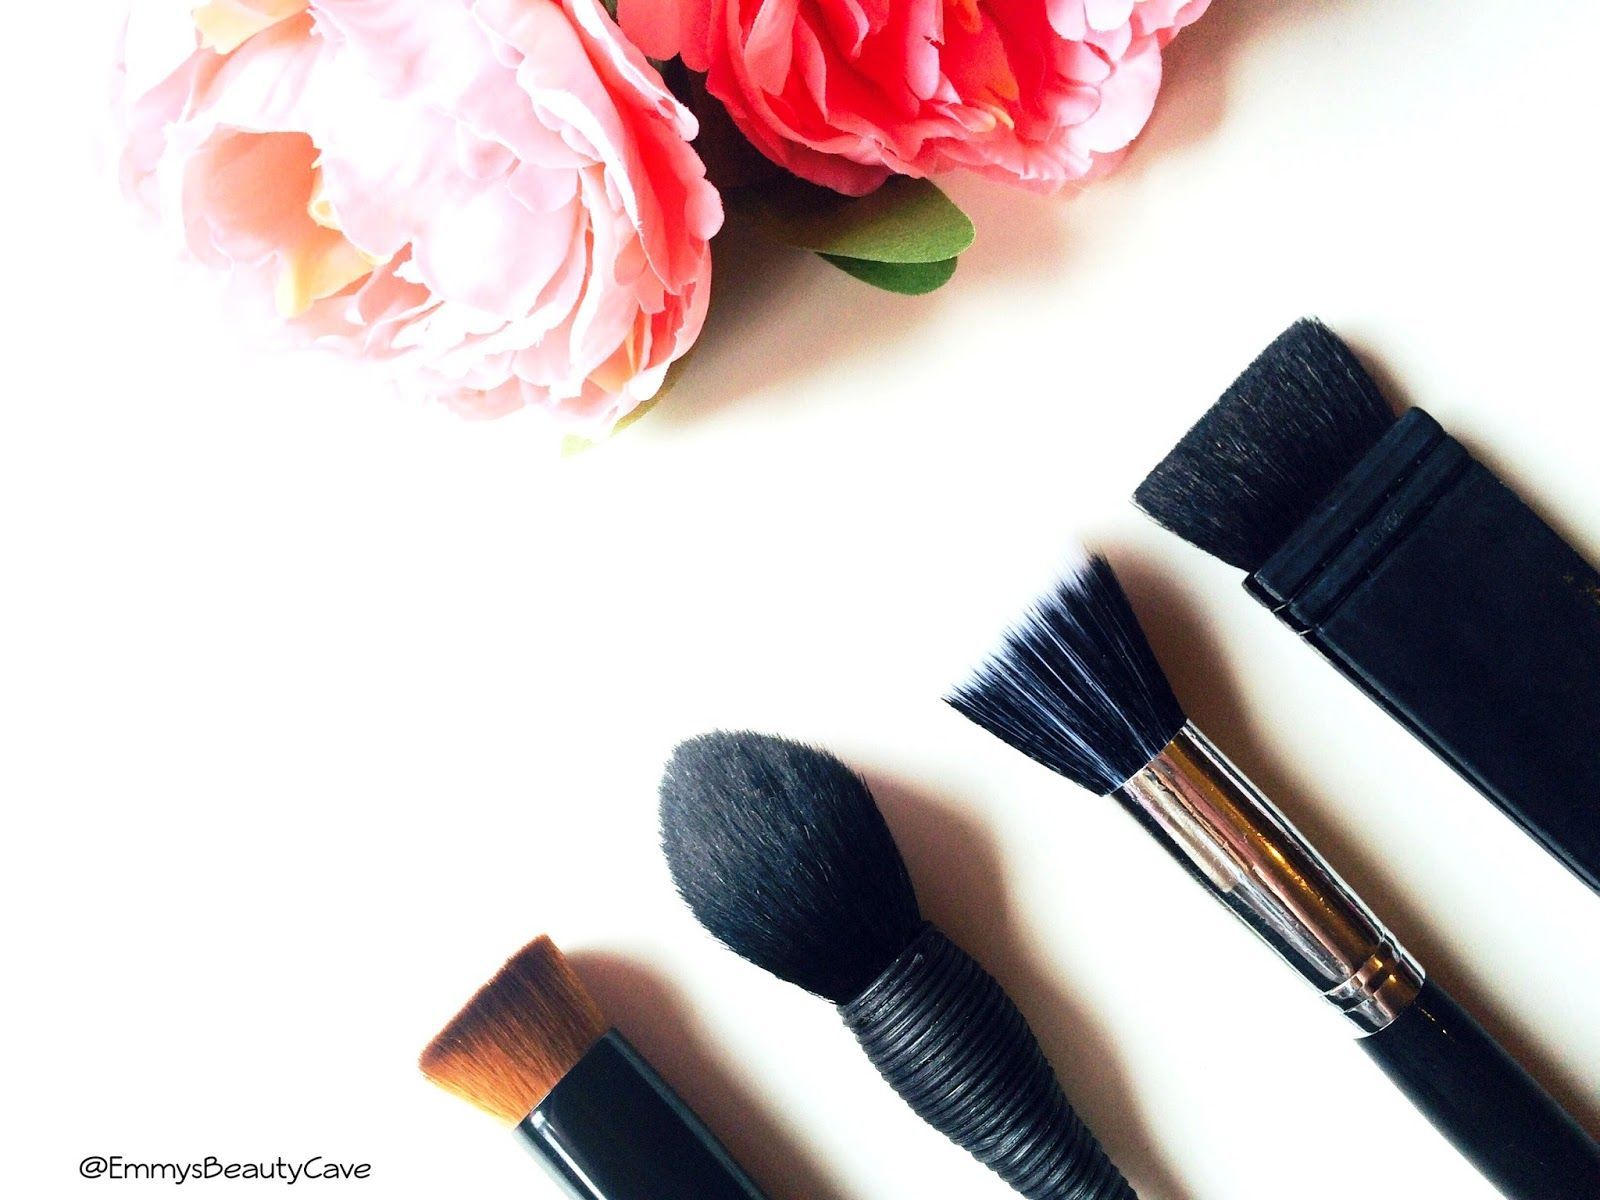 Bargain Budget Makeup Brushes Worth A Buy | EmmysBeautyCave ...